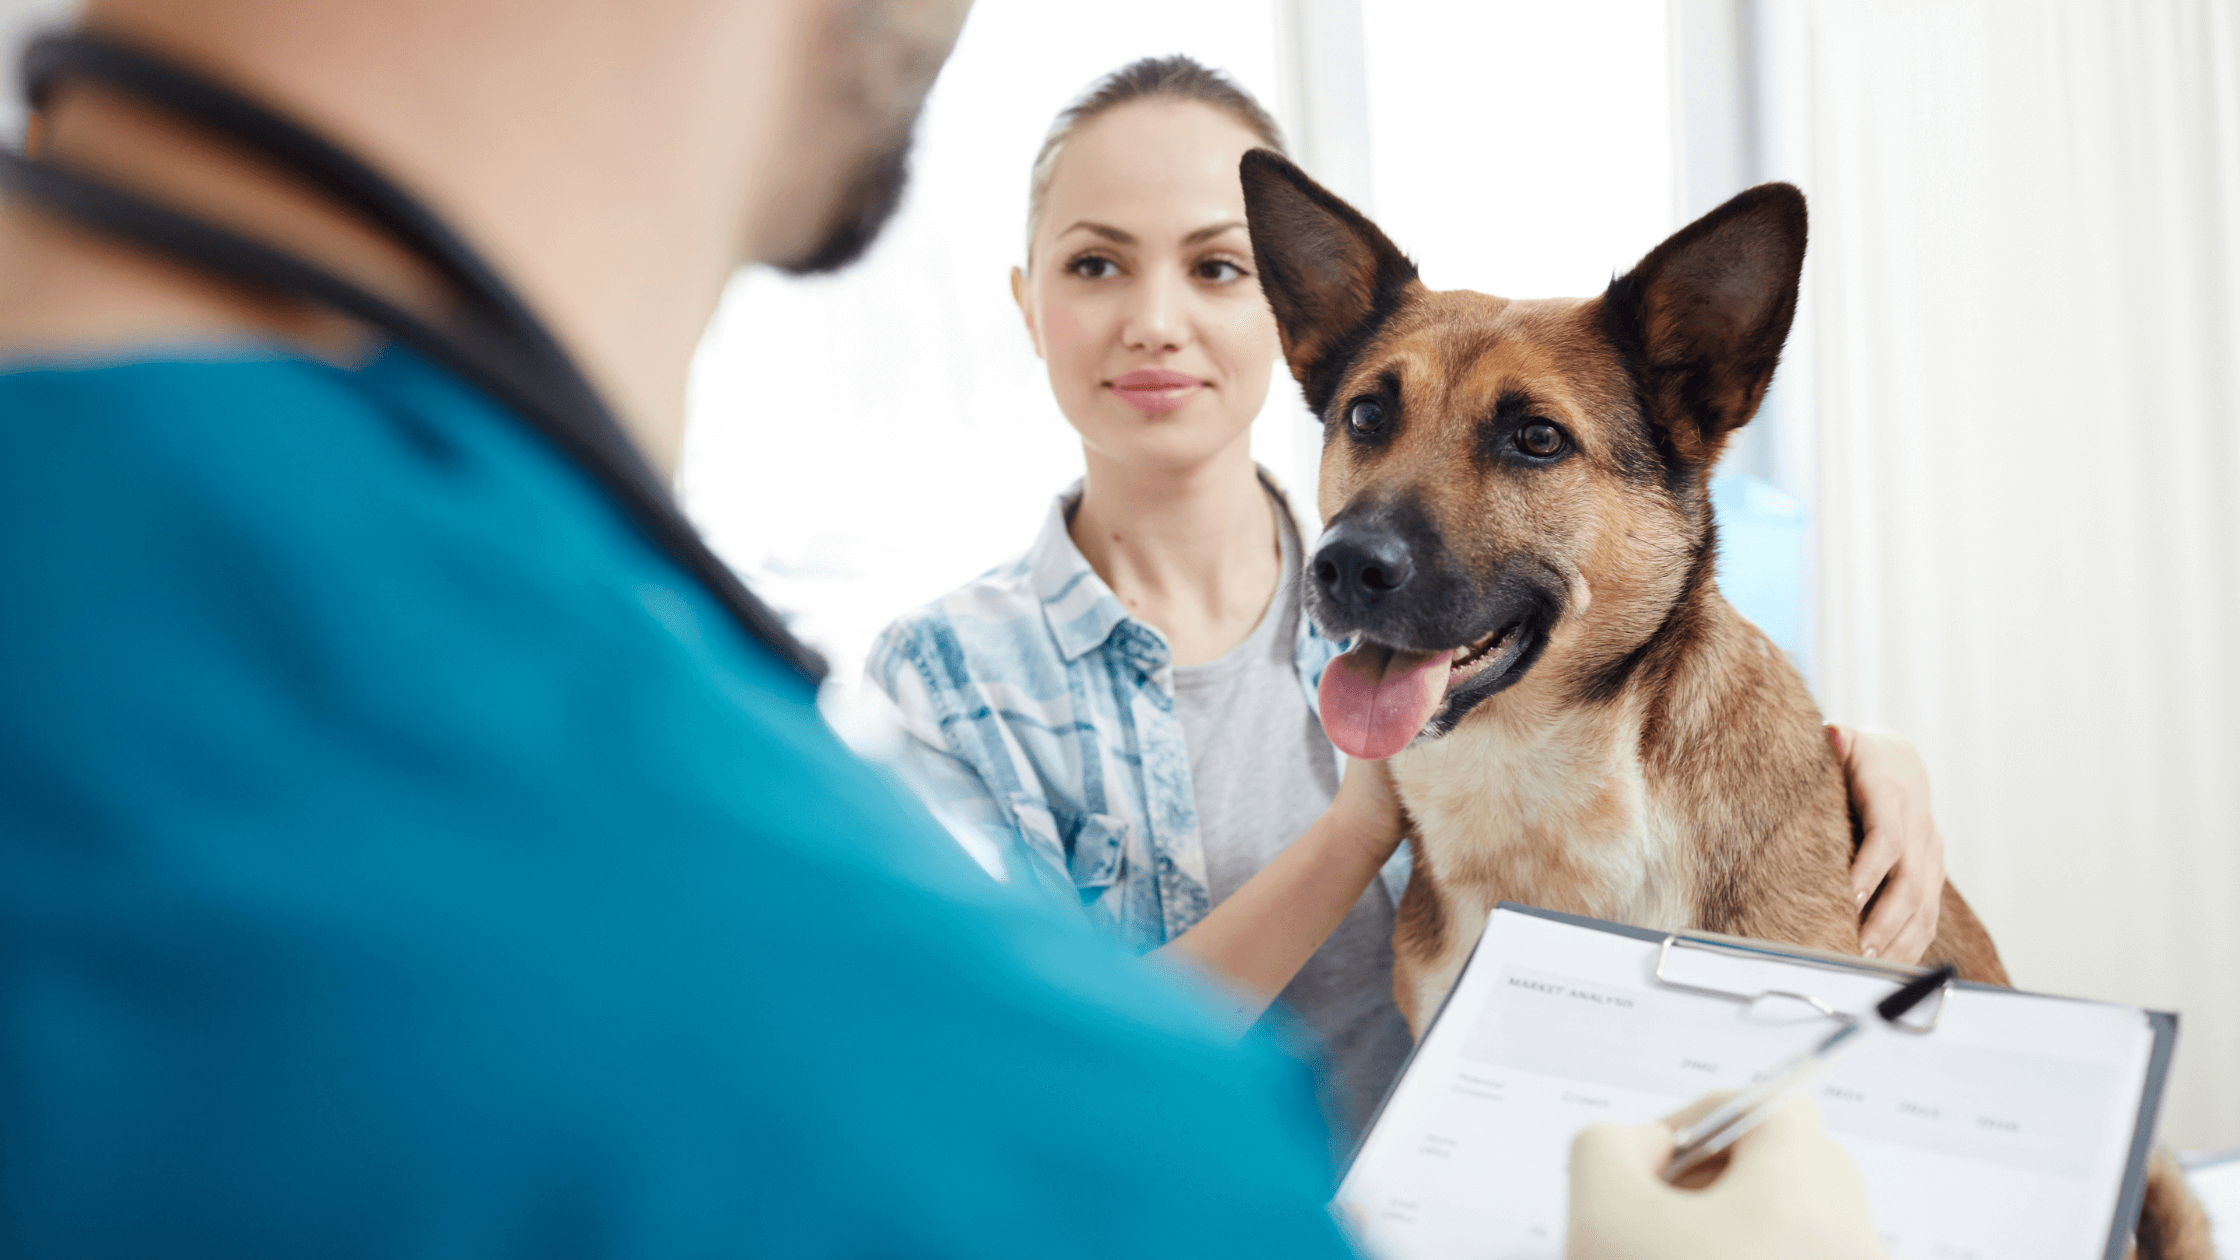 Here’s Why This Pet Insurance Stock is a Strong Buy